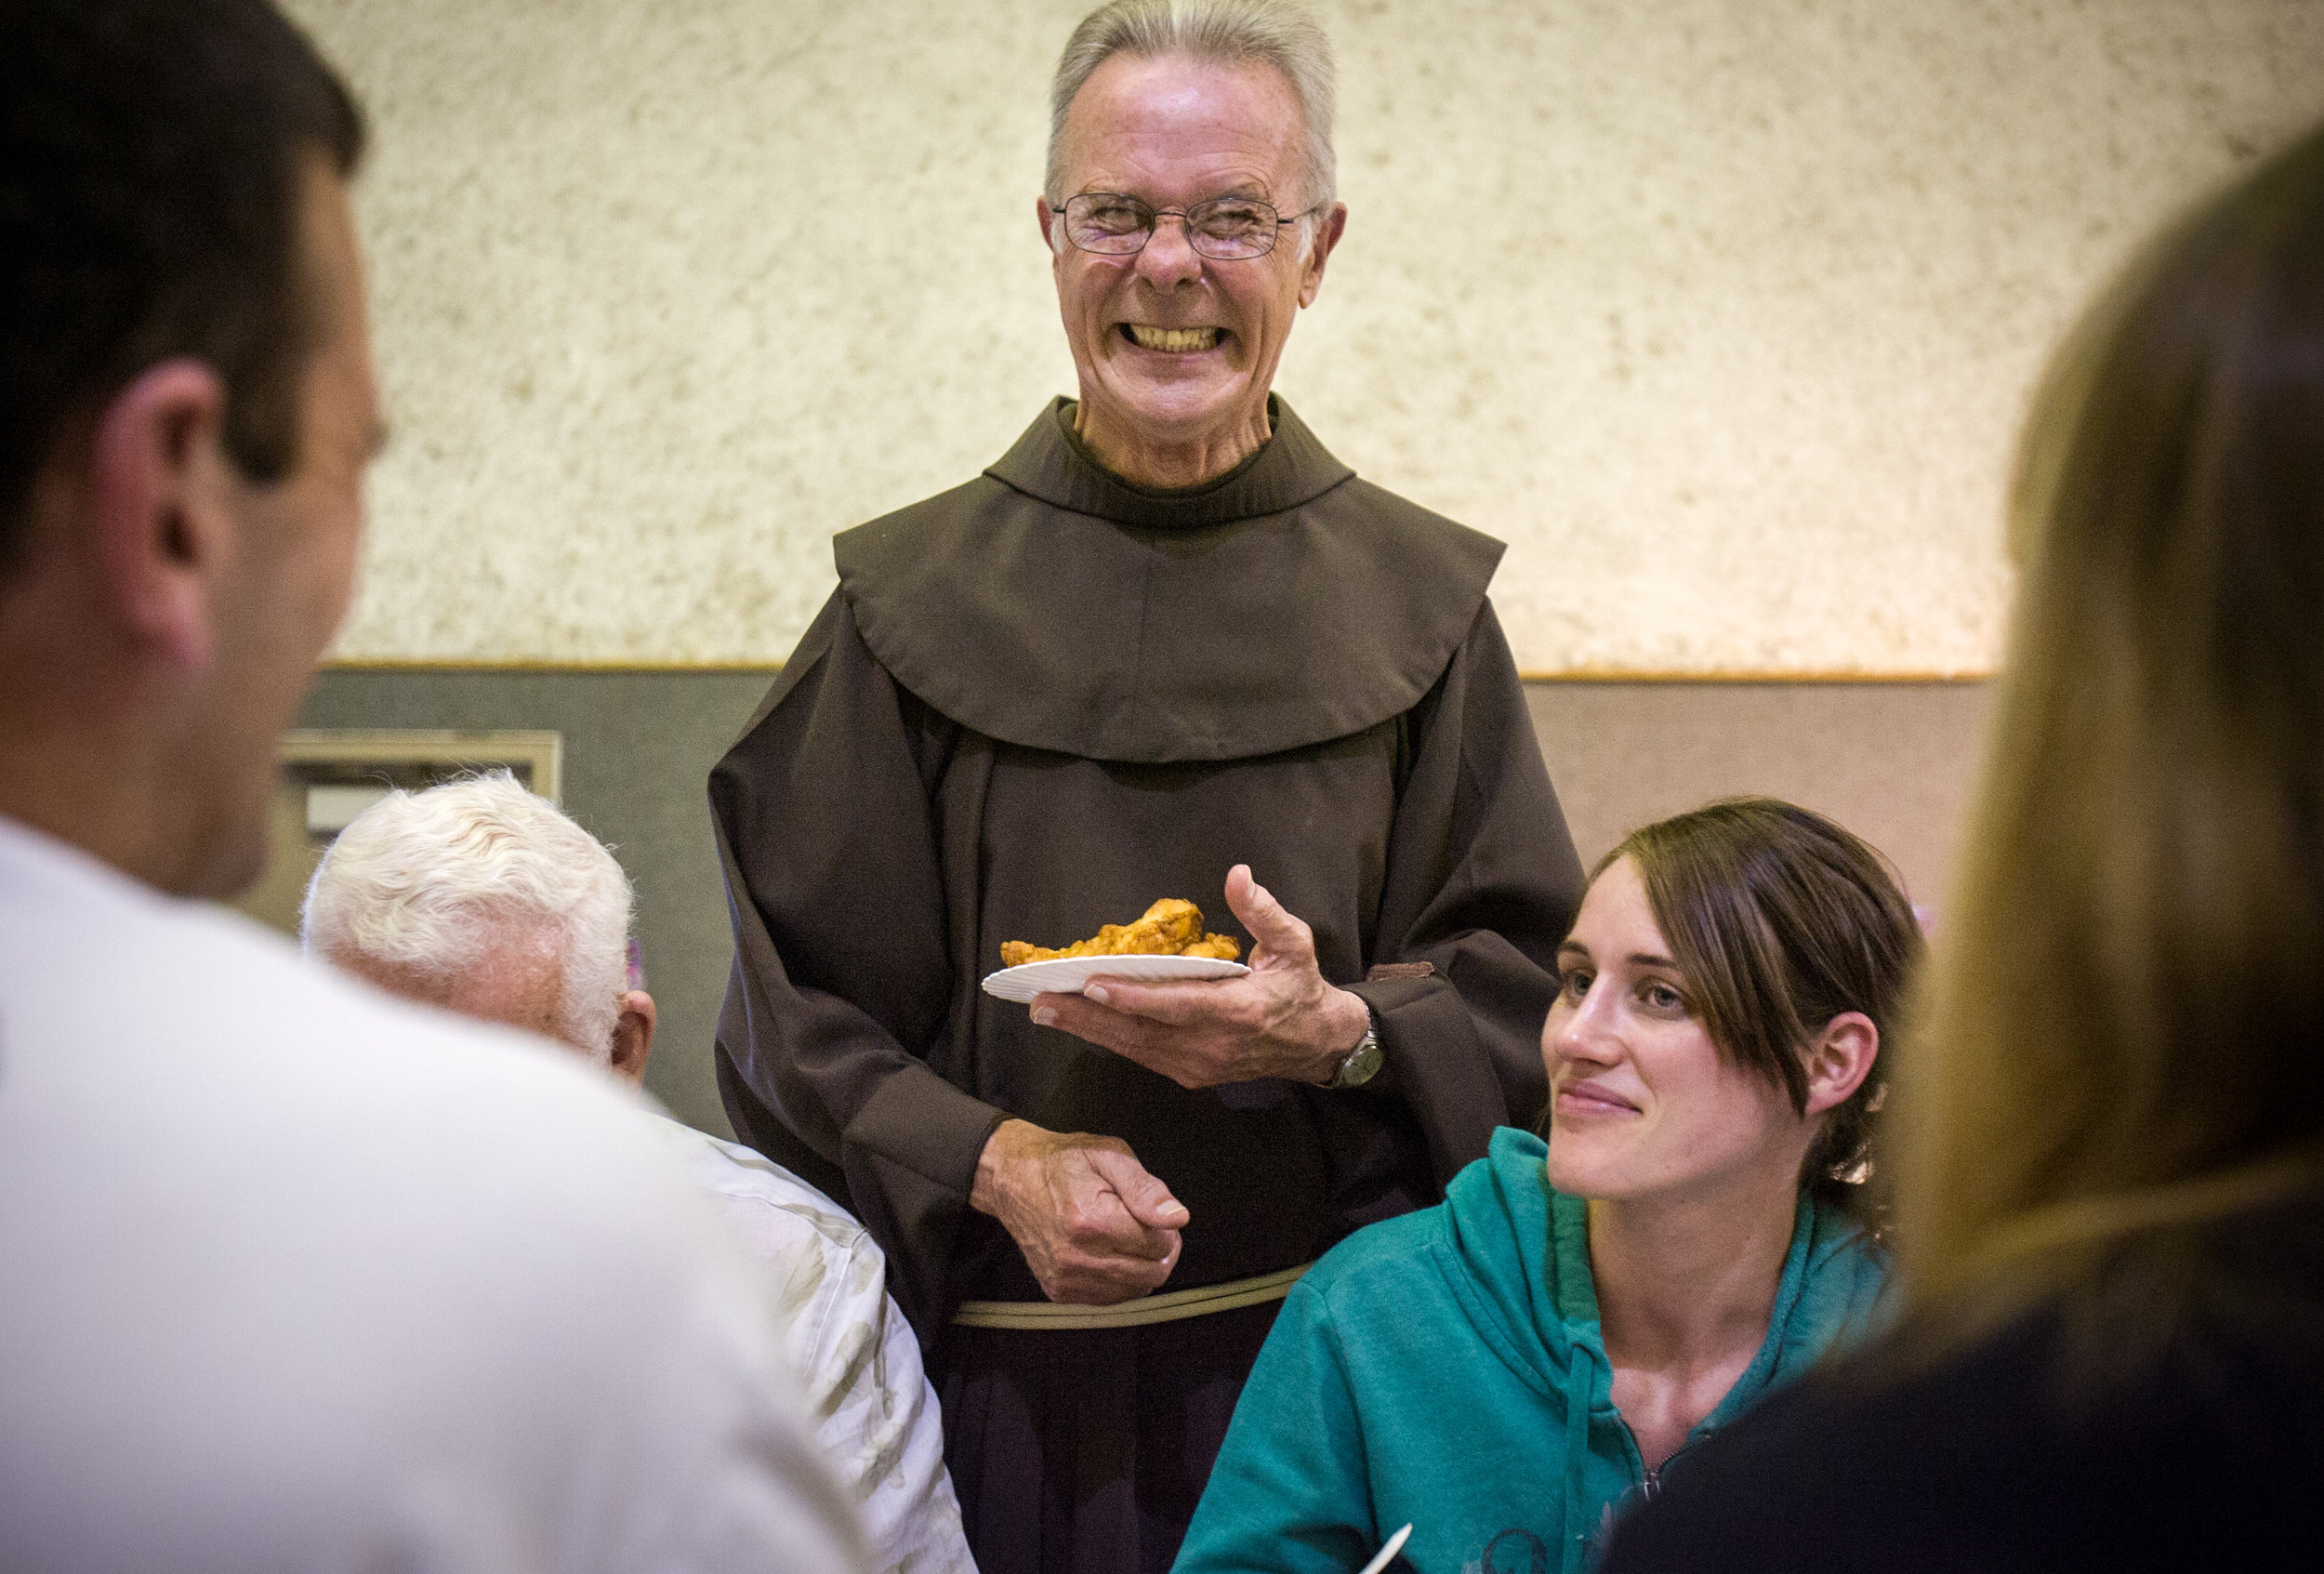  The Rev. Richard Juzix laughs as he makes his rounds through the dining hall during a fish fry supper April 1, 2011, at Sts. Simon & Jude Catholic Church in Huntington Beach, Calif. 